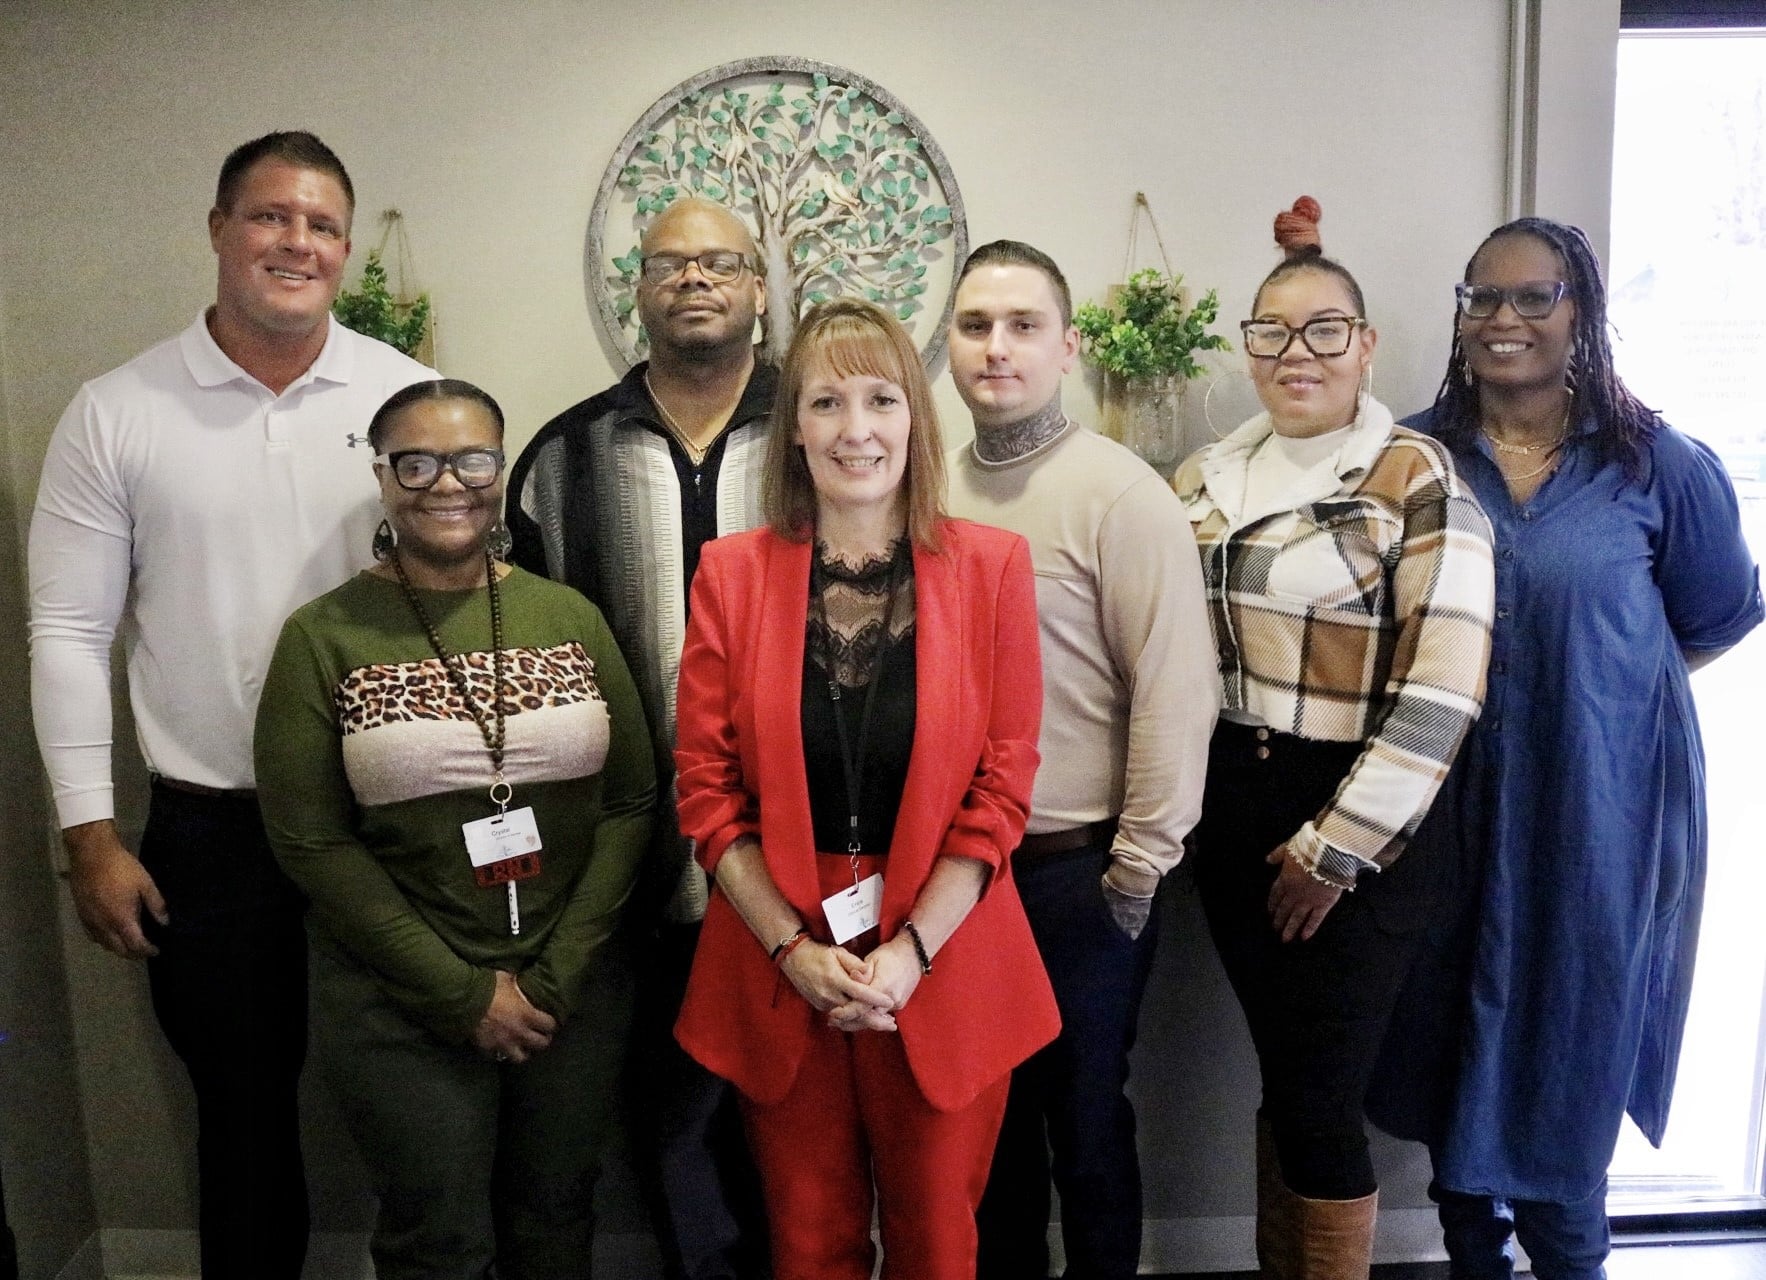 Hickory Treatment Center Indianapolis Team - A group of dedicated professionals at Hickory Treatment Center Indianapolis, working together to provide compassionate care and support for individuals seeking recovery from substance abuse.